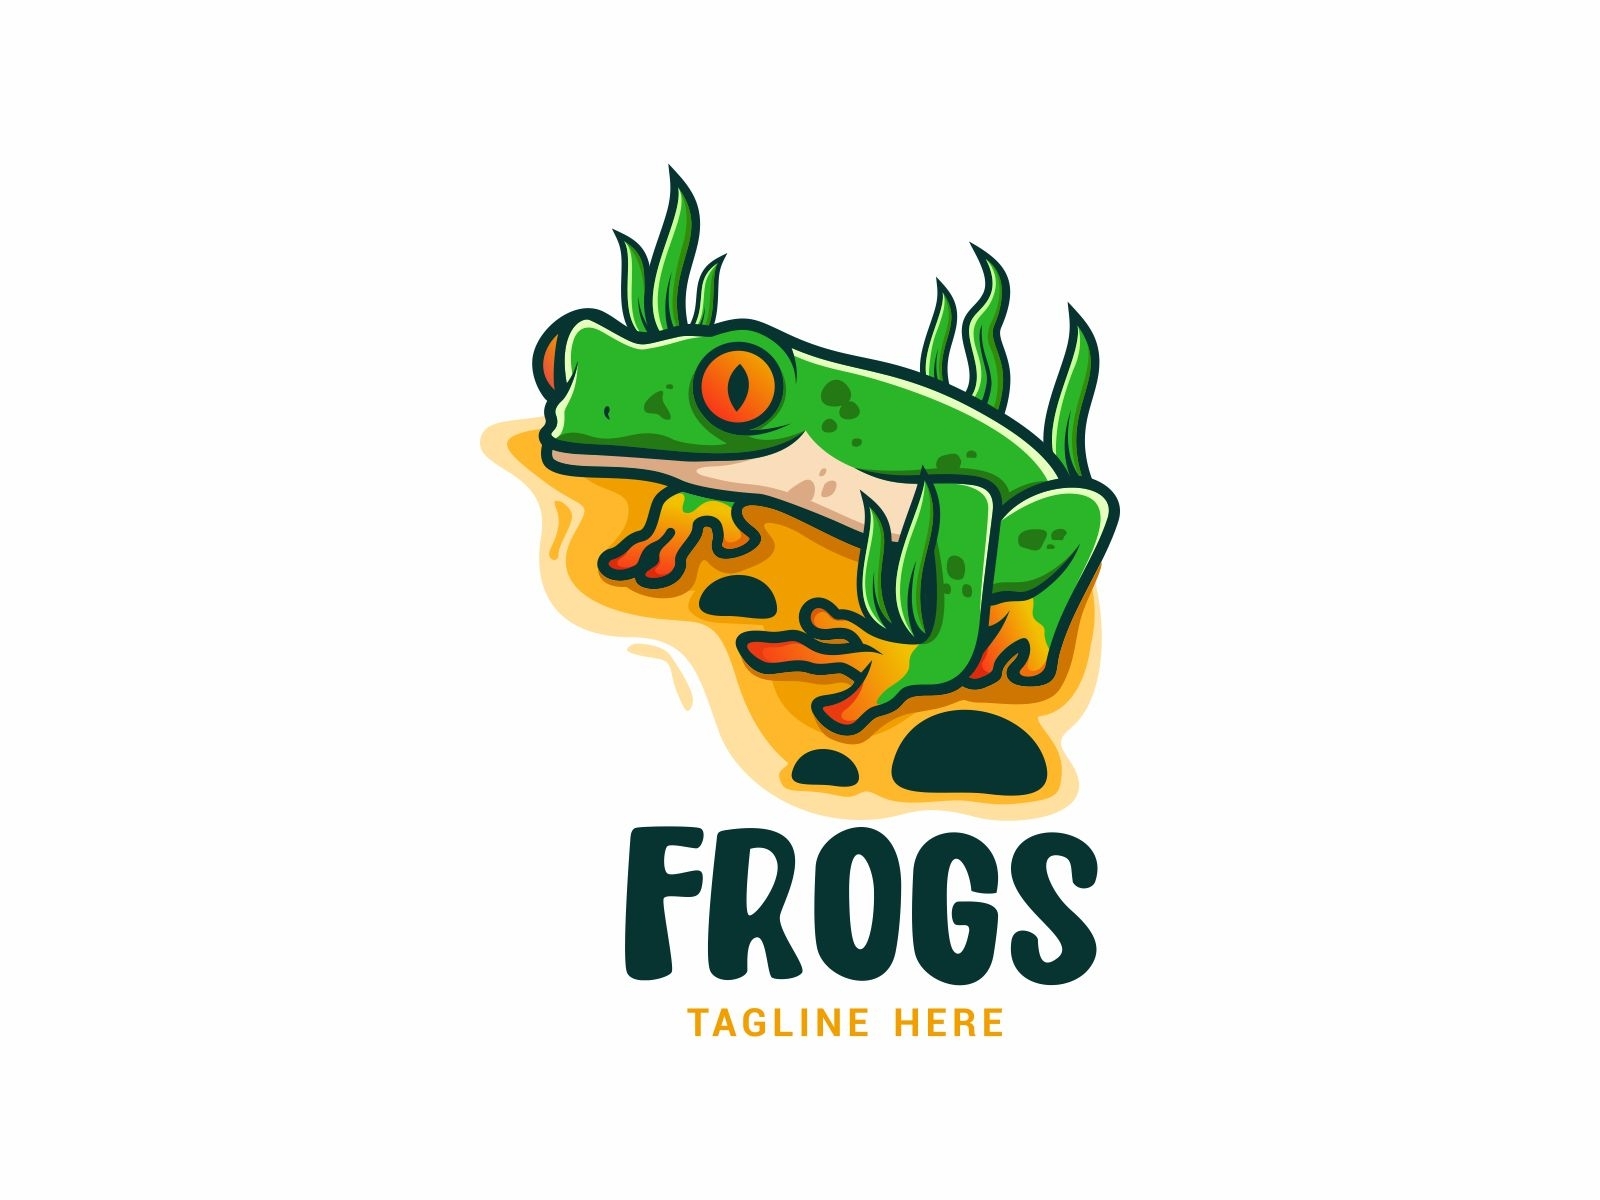 Frog Vector Logo Design by Majestic Logo on Dribbble